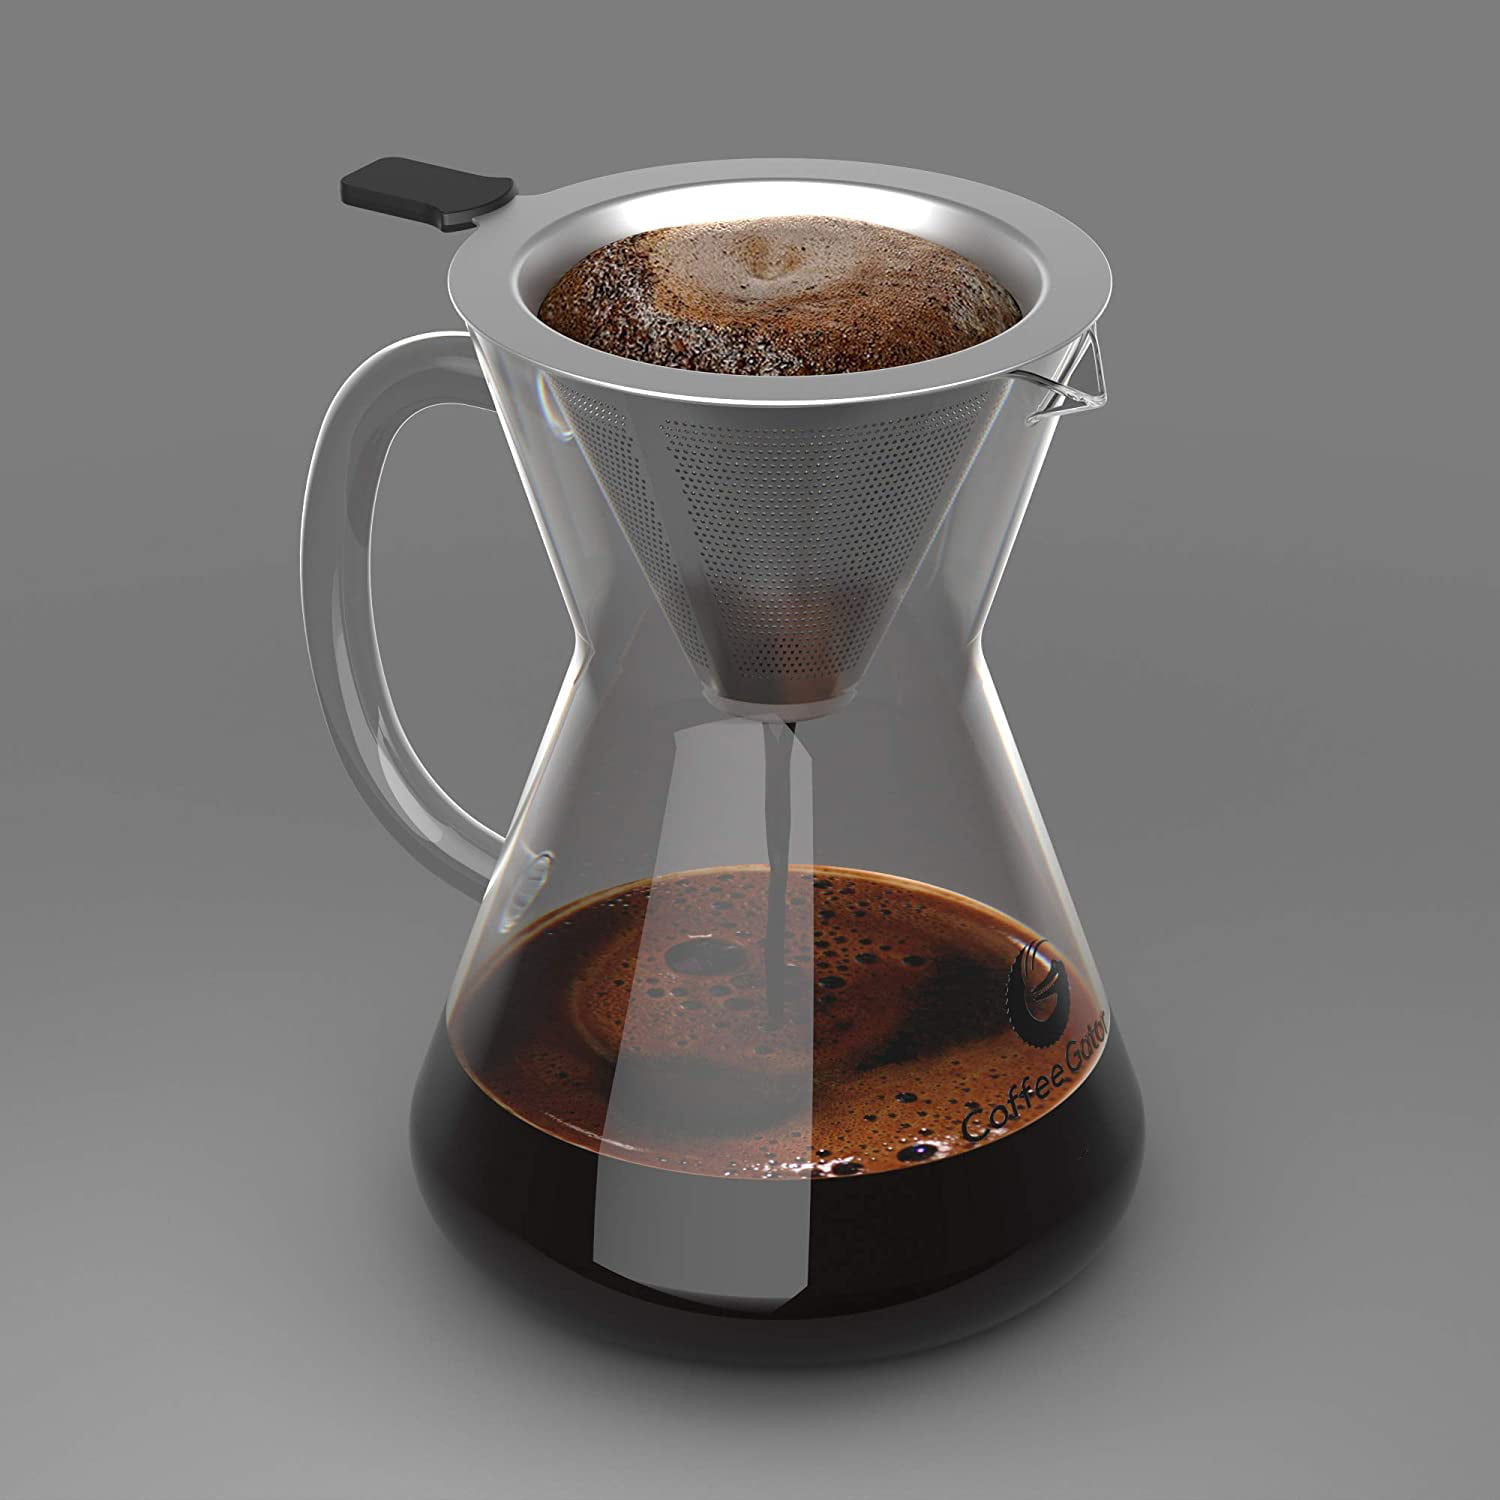 Coffee Gator RNAB0190PZW1W coffee gator pour over coffee maker - 10.5 oz  paperless, portable, drip coffee brewer pour over set w/glass carafe &  stainles